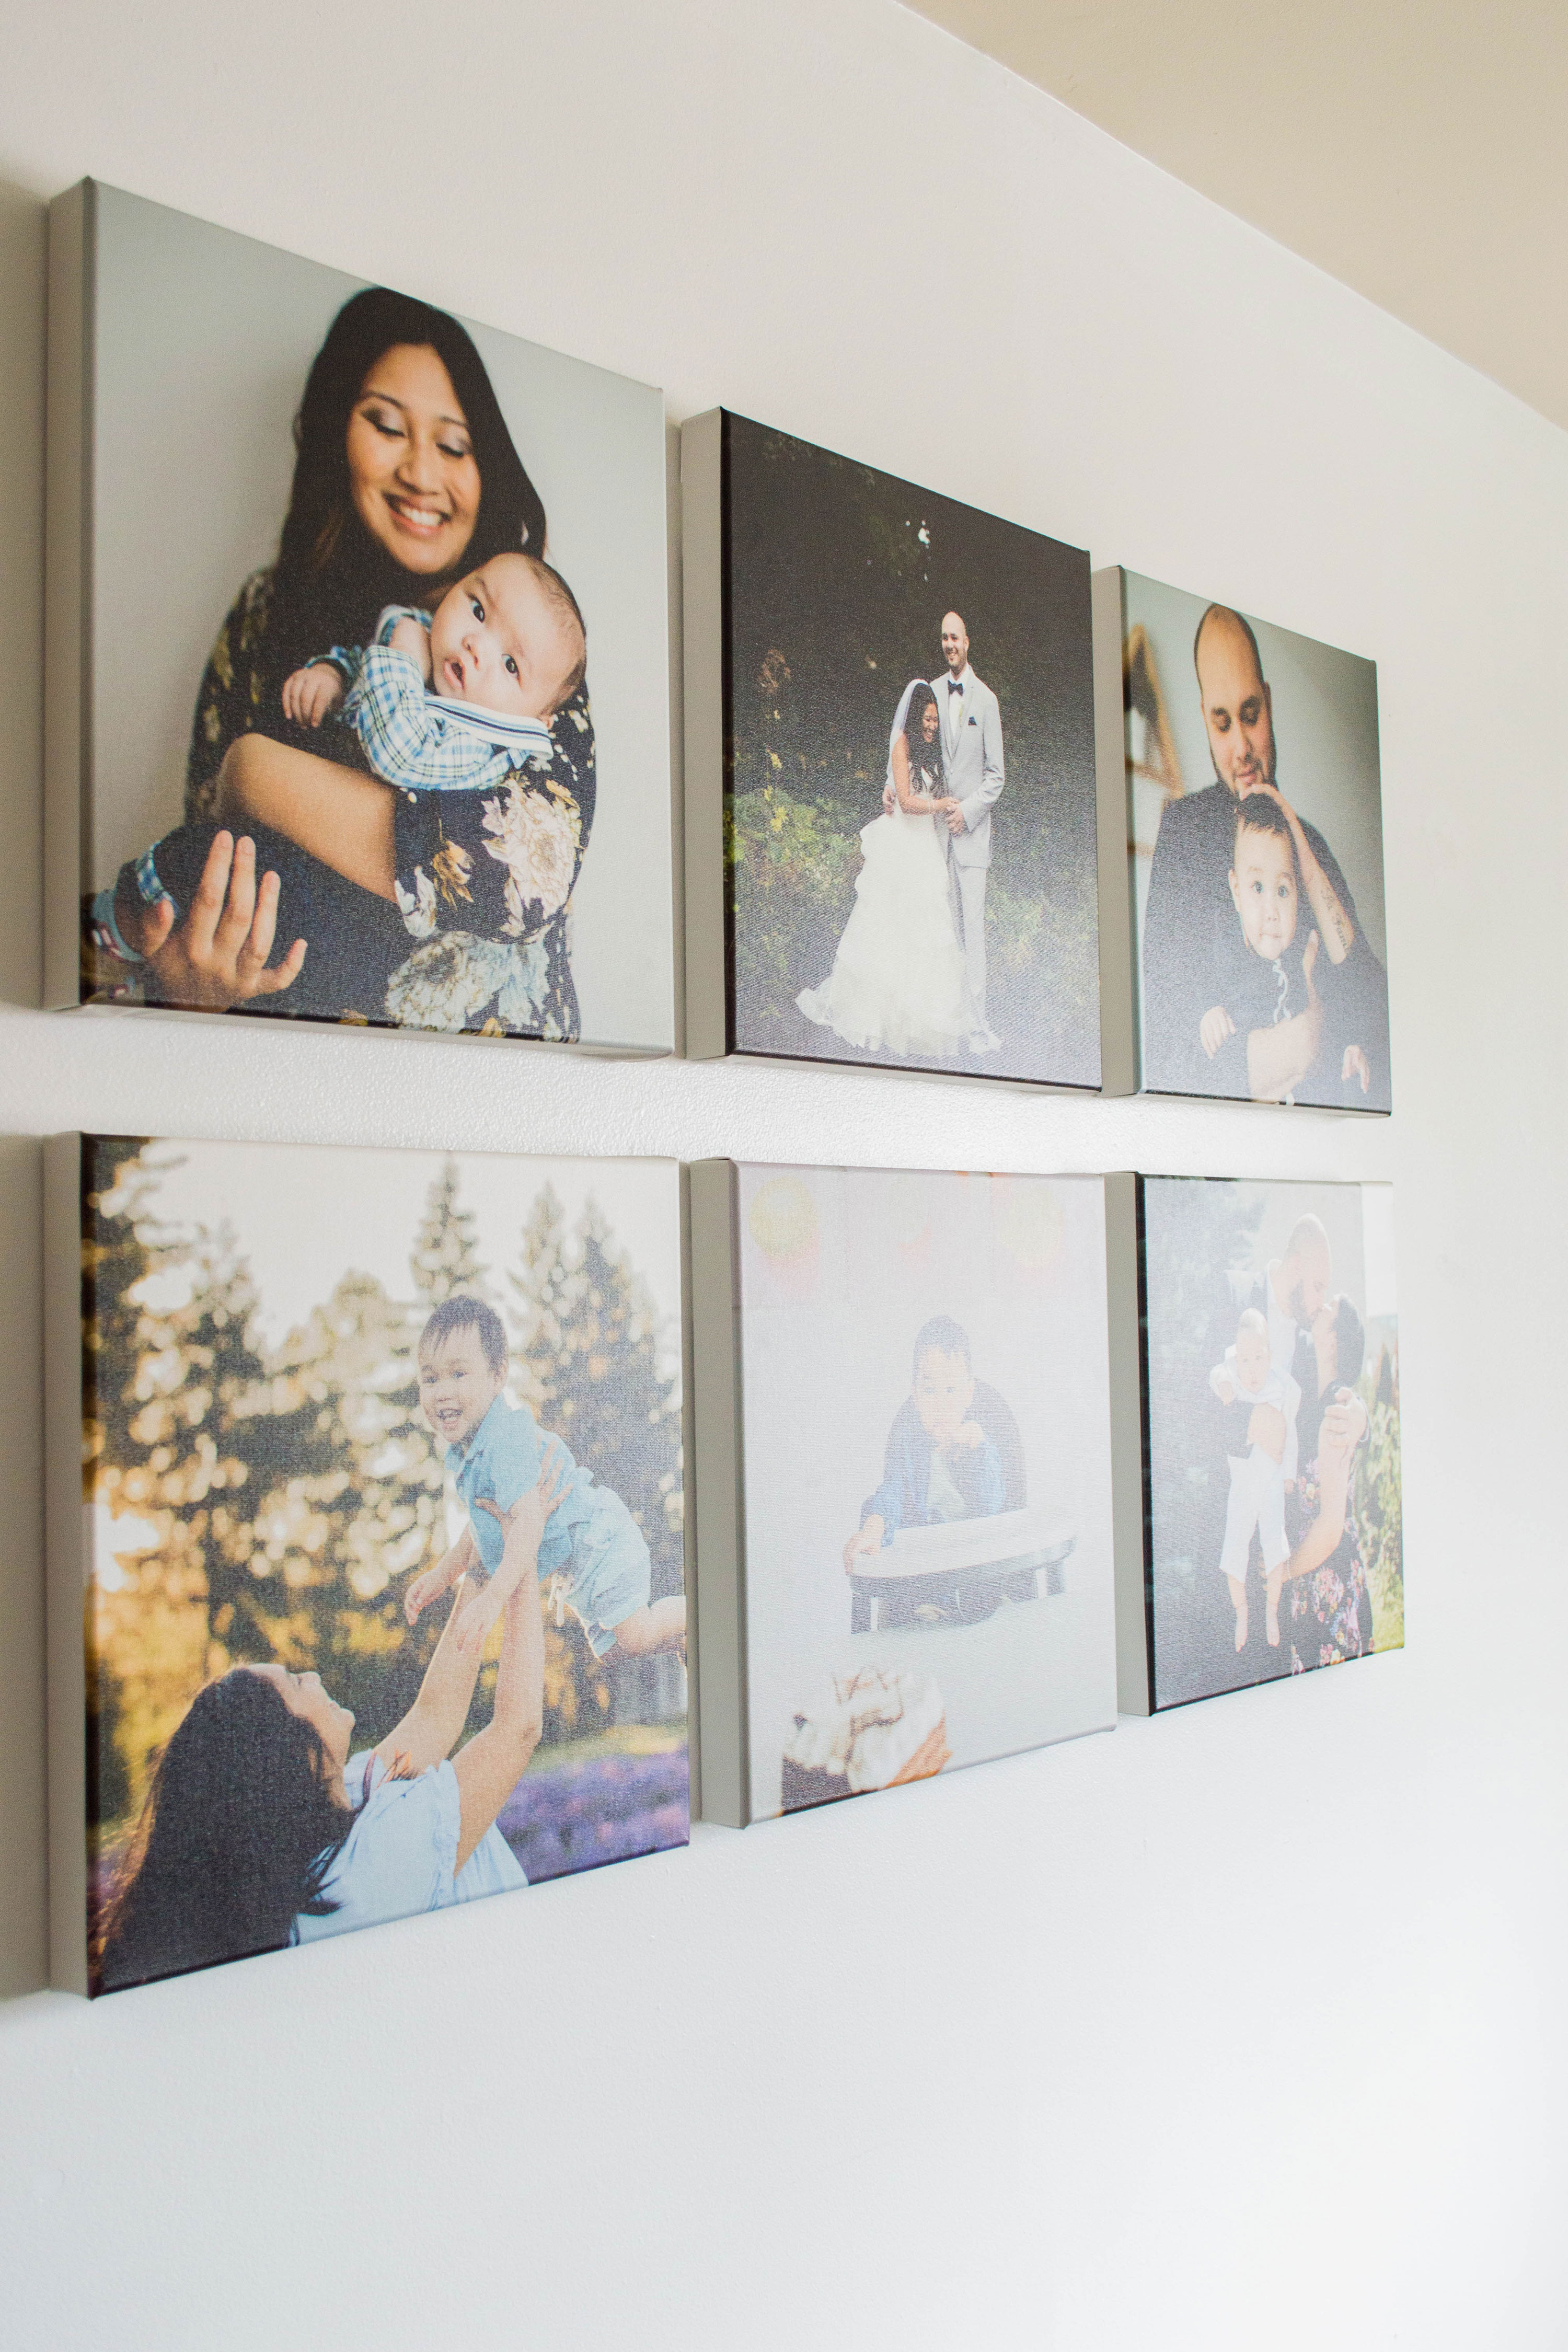 Impress your guests with the easiest gallery wall layout: grid style! My DIY guide will help any beginner DIYer. Come join me for some decorating fun! #gallerywall #gallerywallideas